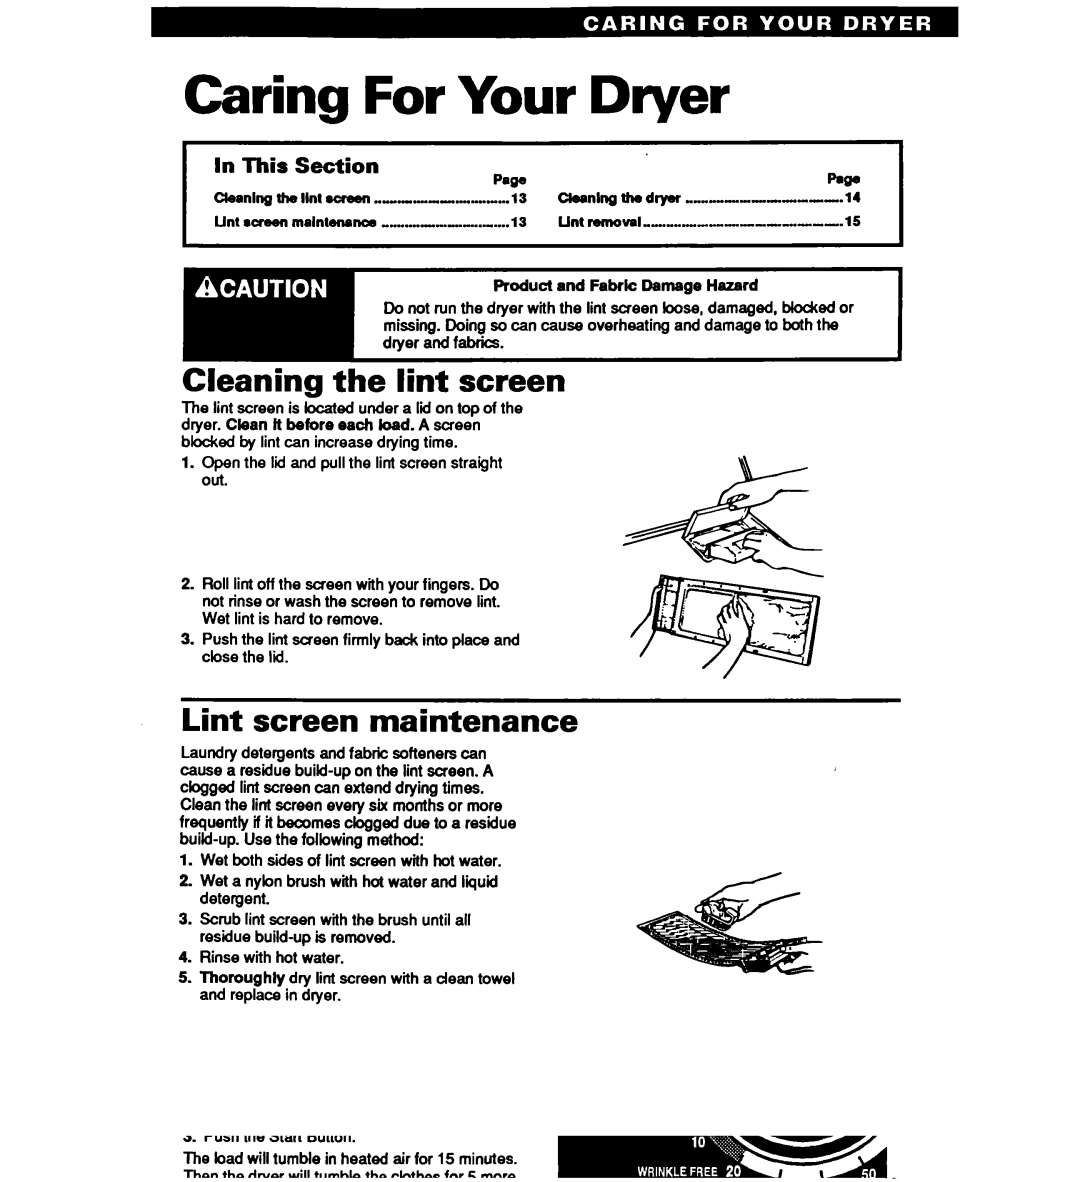 Whirlpool GL4030V, GL5030 Caring For Your Dryer, Cleaning the lint screen, Lint screen maintenance, Section PaWJ, This 